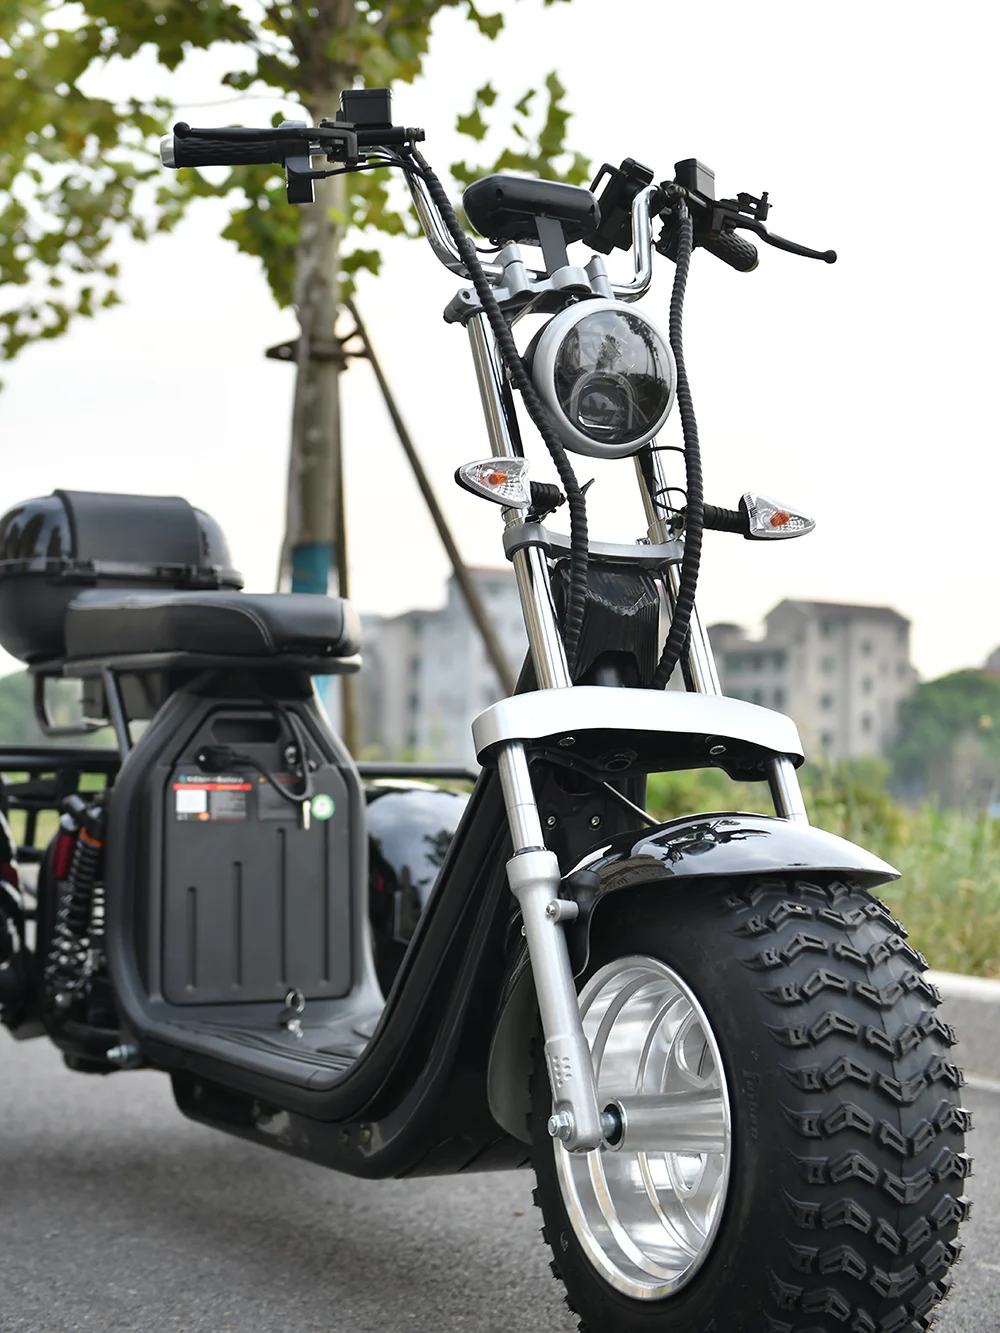 Adult Electric 3 Wheel Motorcycle 3000w Motor Max Load 250kg Max Speed 45km/ h Outdoor Electric Scooter For The Elderly - Electric Scooters - AliExpress